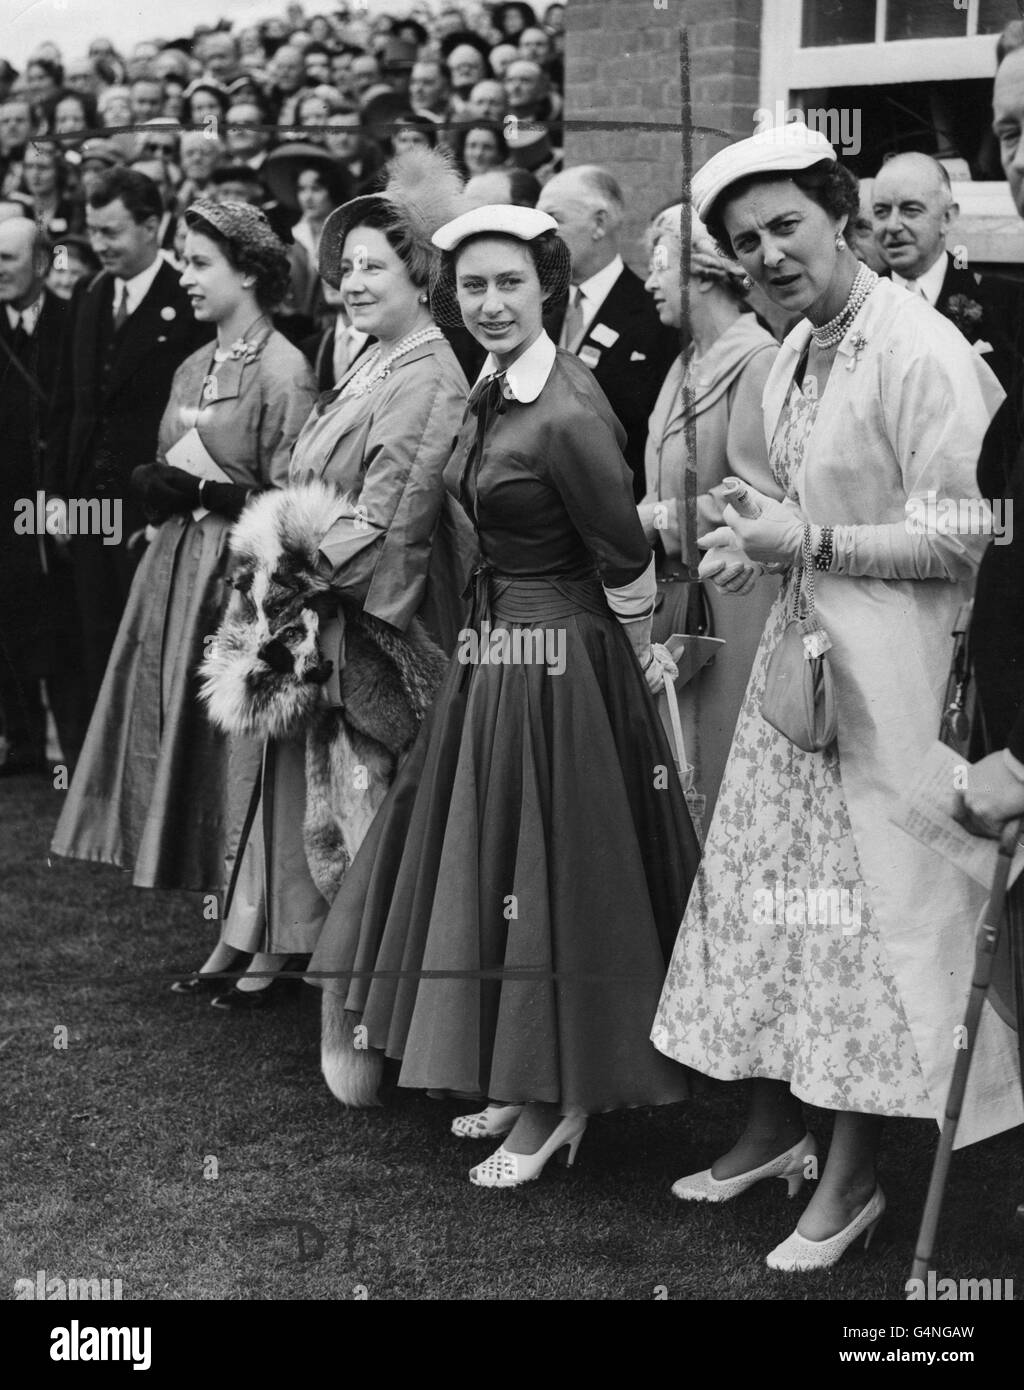 Horse Racing - Royal Ascot - Royal Hunt Cup - Ascot Racecourse. Left to right, Queen Elizabeth II, the Queen Mother, Princess Margaret, the Princess Royal and the Duchess of Kent at Royal Ascot Stock Photo